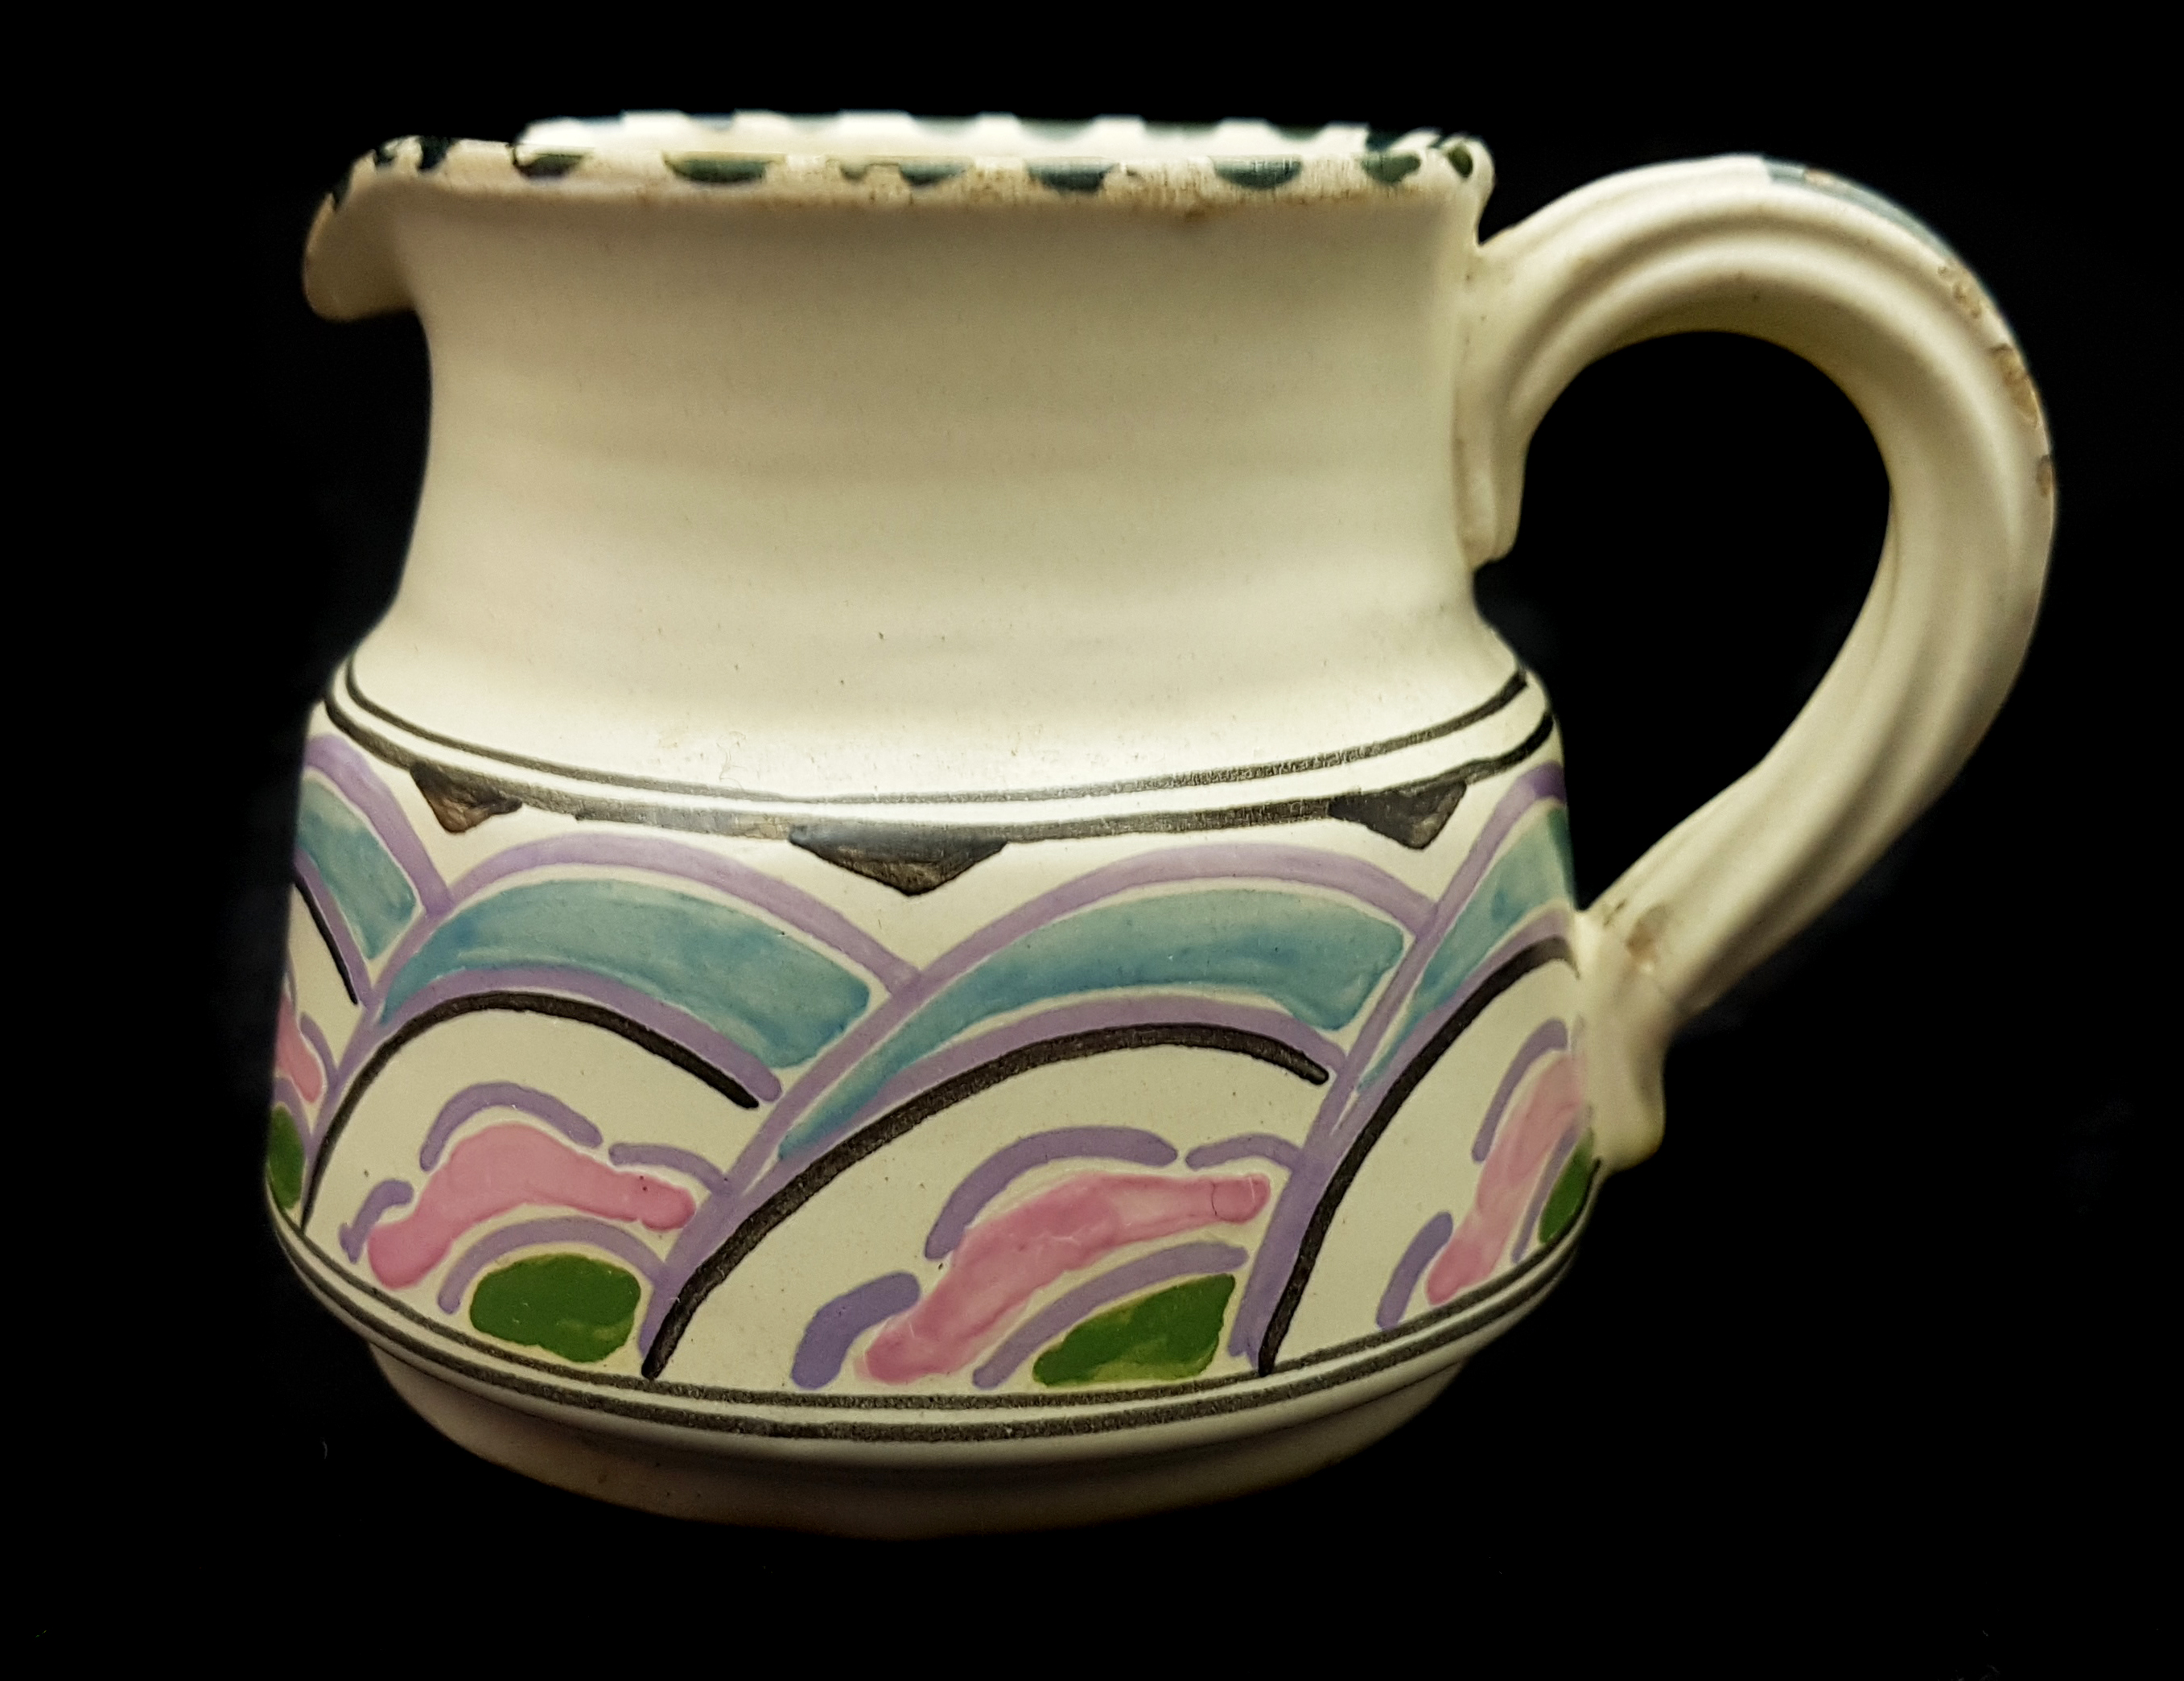 7 items of Honiton Art Deco pottery, each painted with a stylised cloud design in grey blues and - Image 4 of 4